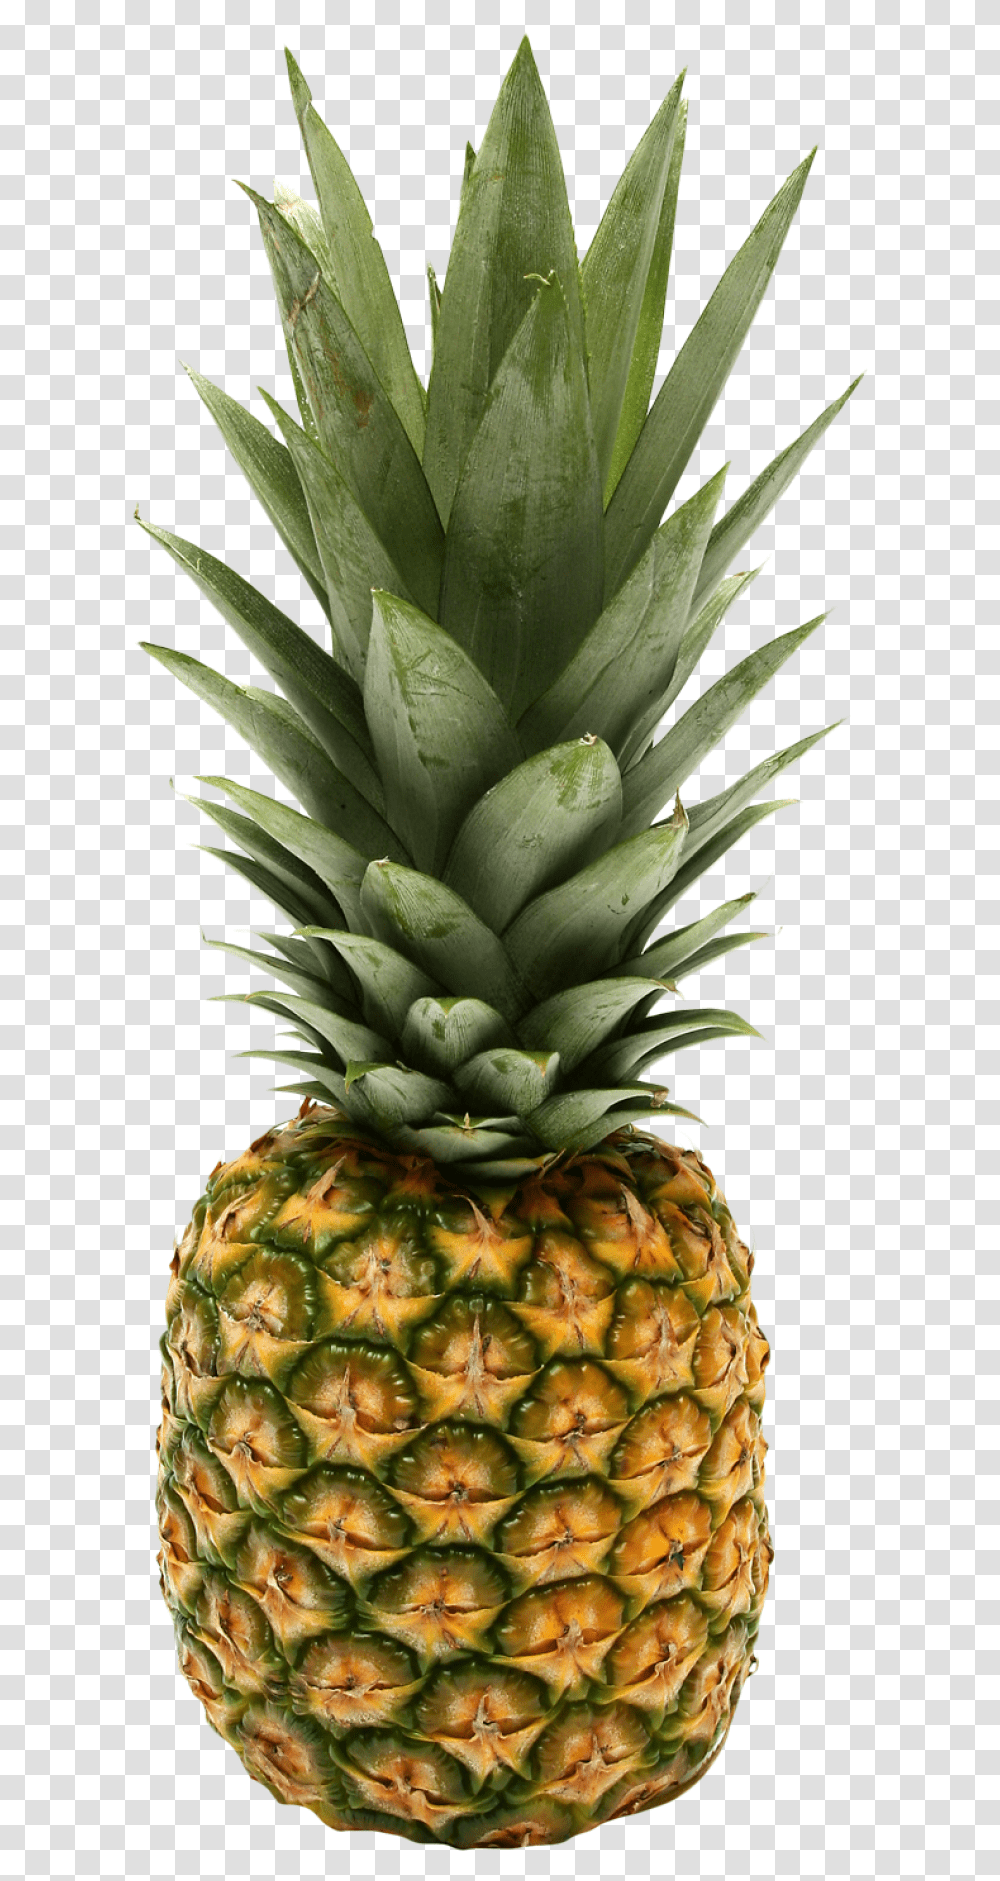 Two Pineapple Image Purepng Free Cc0 Rick And Morty Fruit, Plant, Food Transparent Png